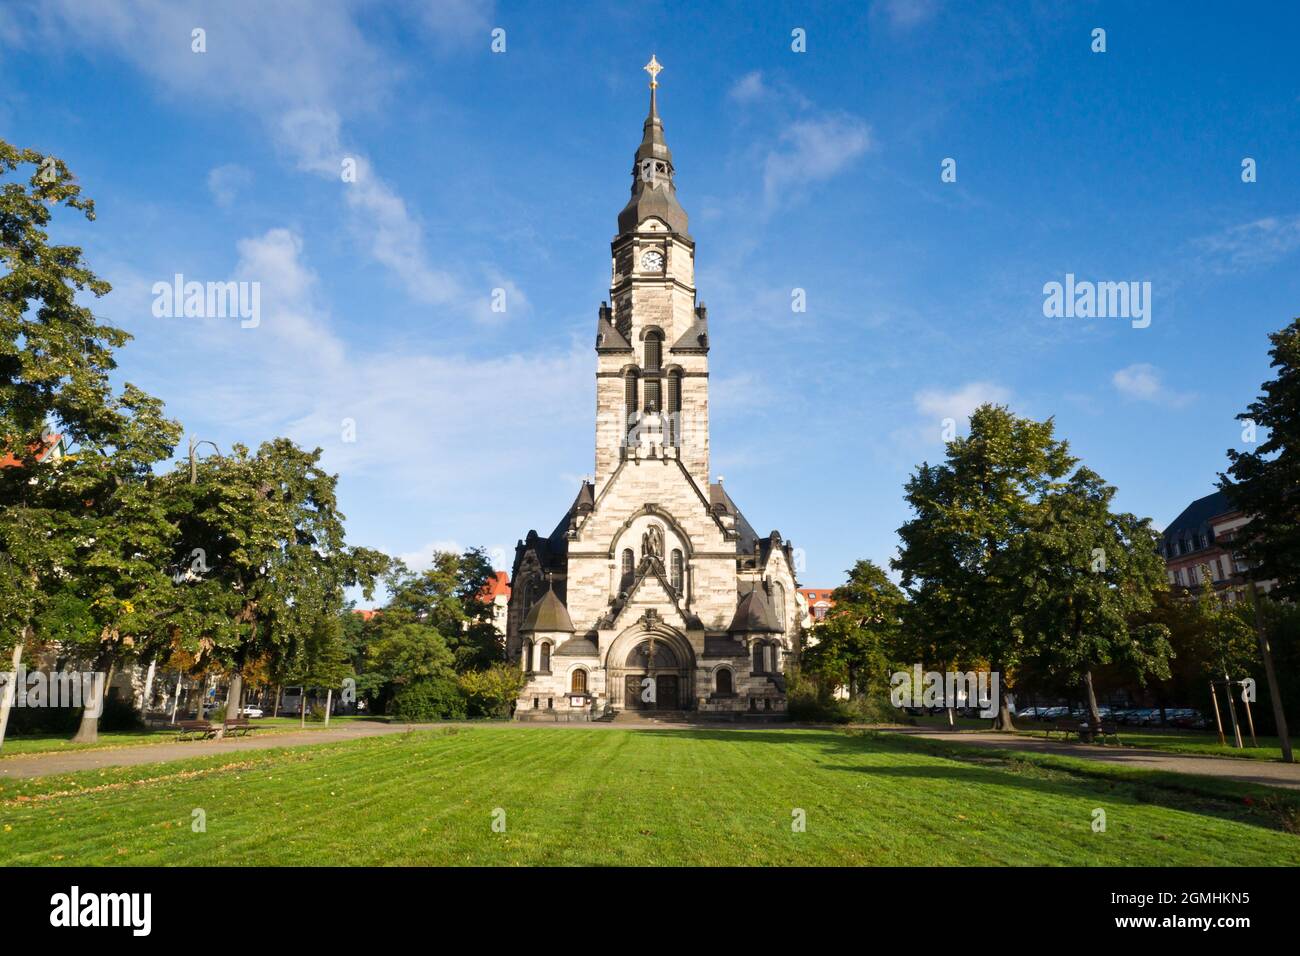 View of the Michaeliskirche in Leipzig/Germany suurounded by a little park. The 70m high building shows architectonic elements of different styles. Stock Photo